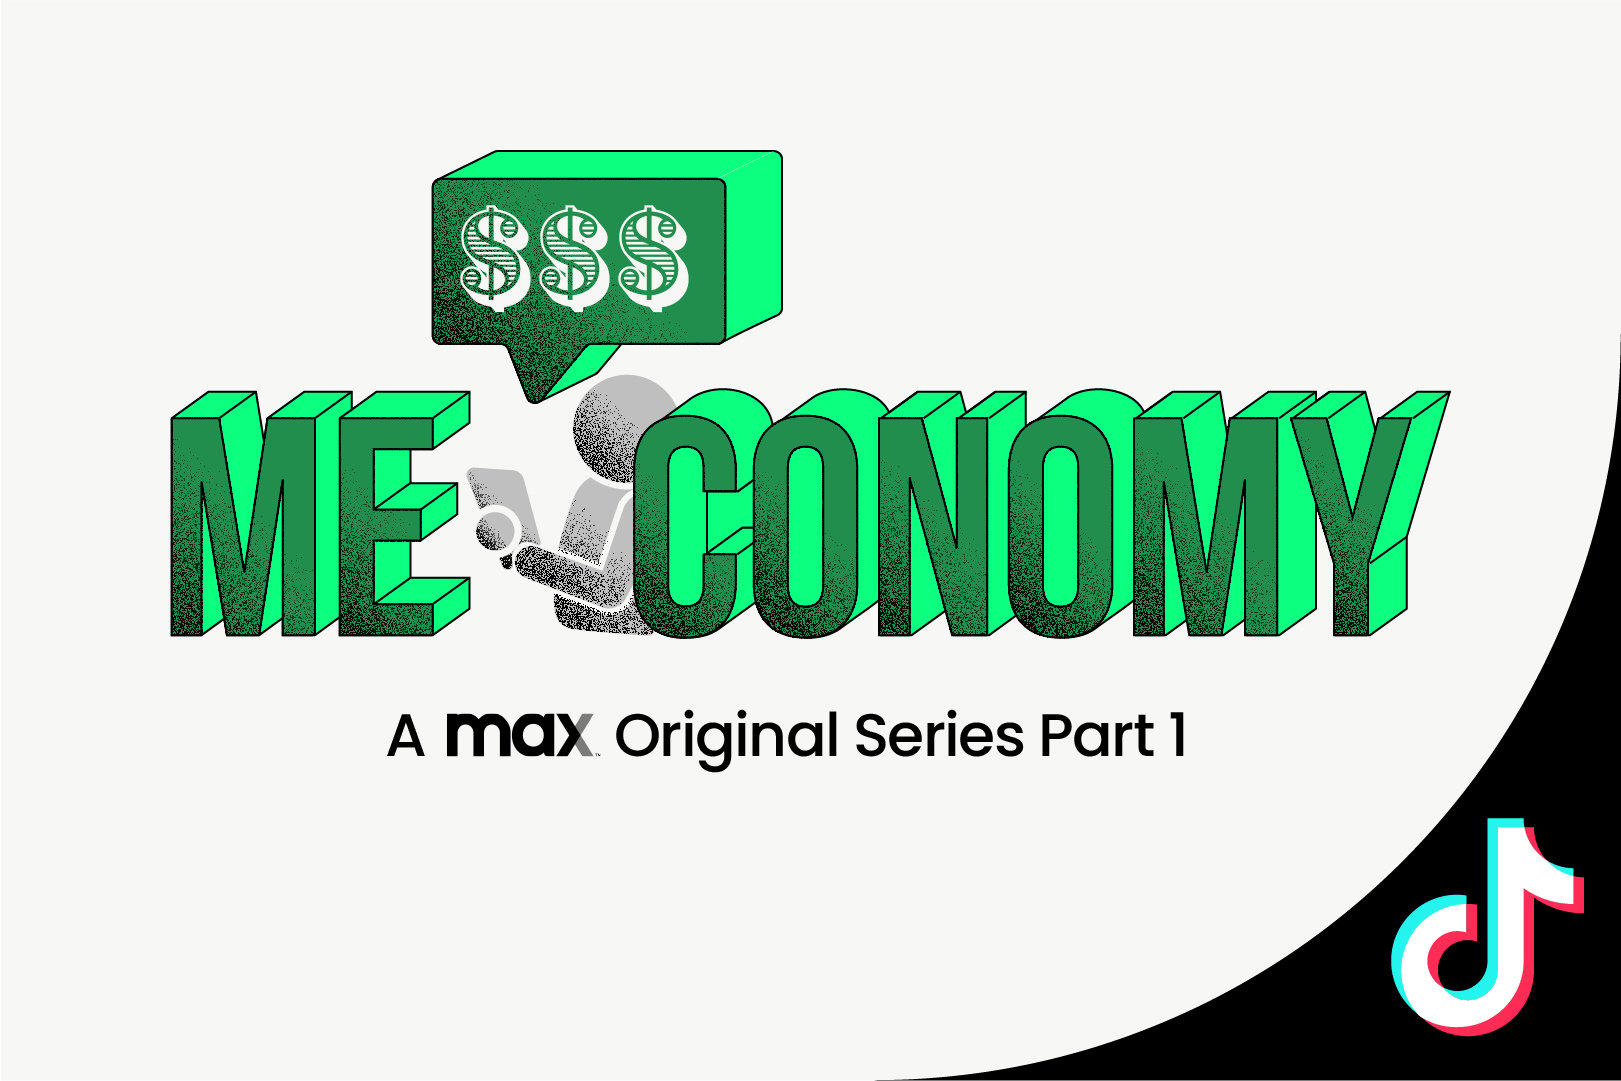 The Emergence of the “Me-conomy”